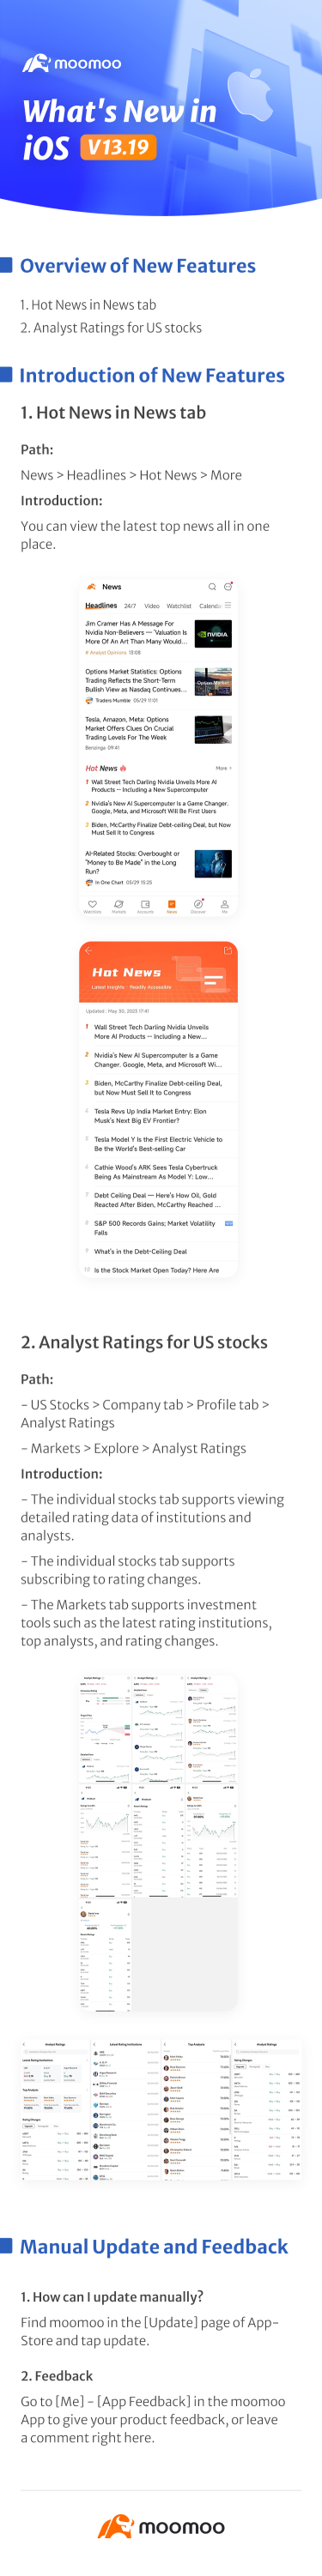 What's New: New Analyst Ratings Upgraded in iOS v13.19